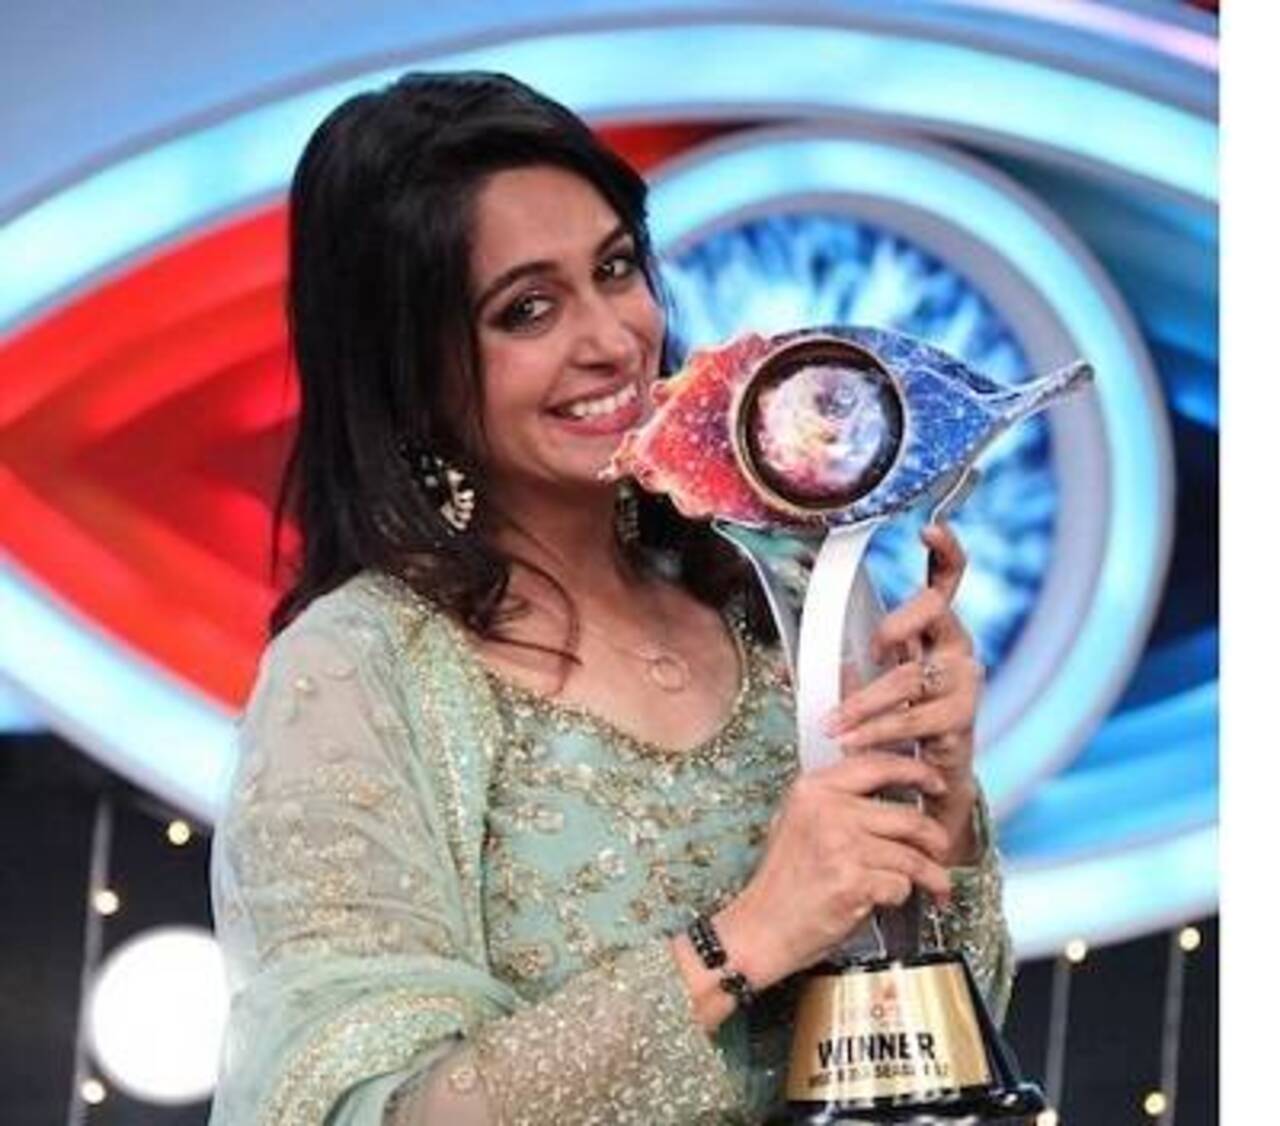 Bigg Boss Season 12 (2018) - Winner: Dipika Kakar
Dipika Kakar is widely regarded as one of the most beloved TV actresses, and her popularity and maturity in playing the game ultimately led her to victory in Season 12